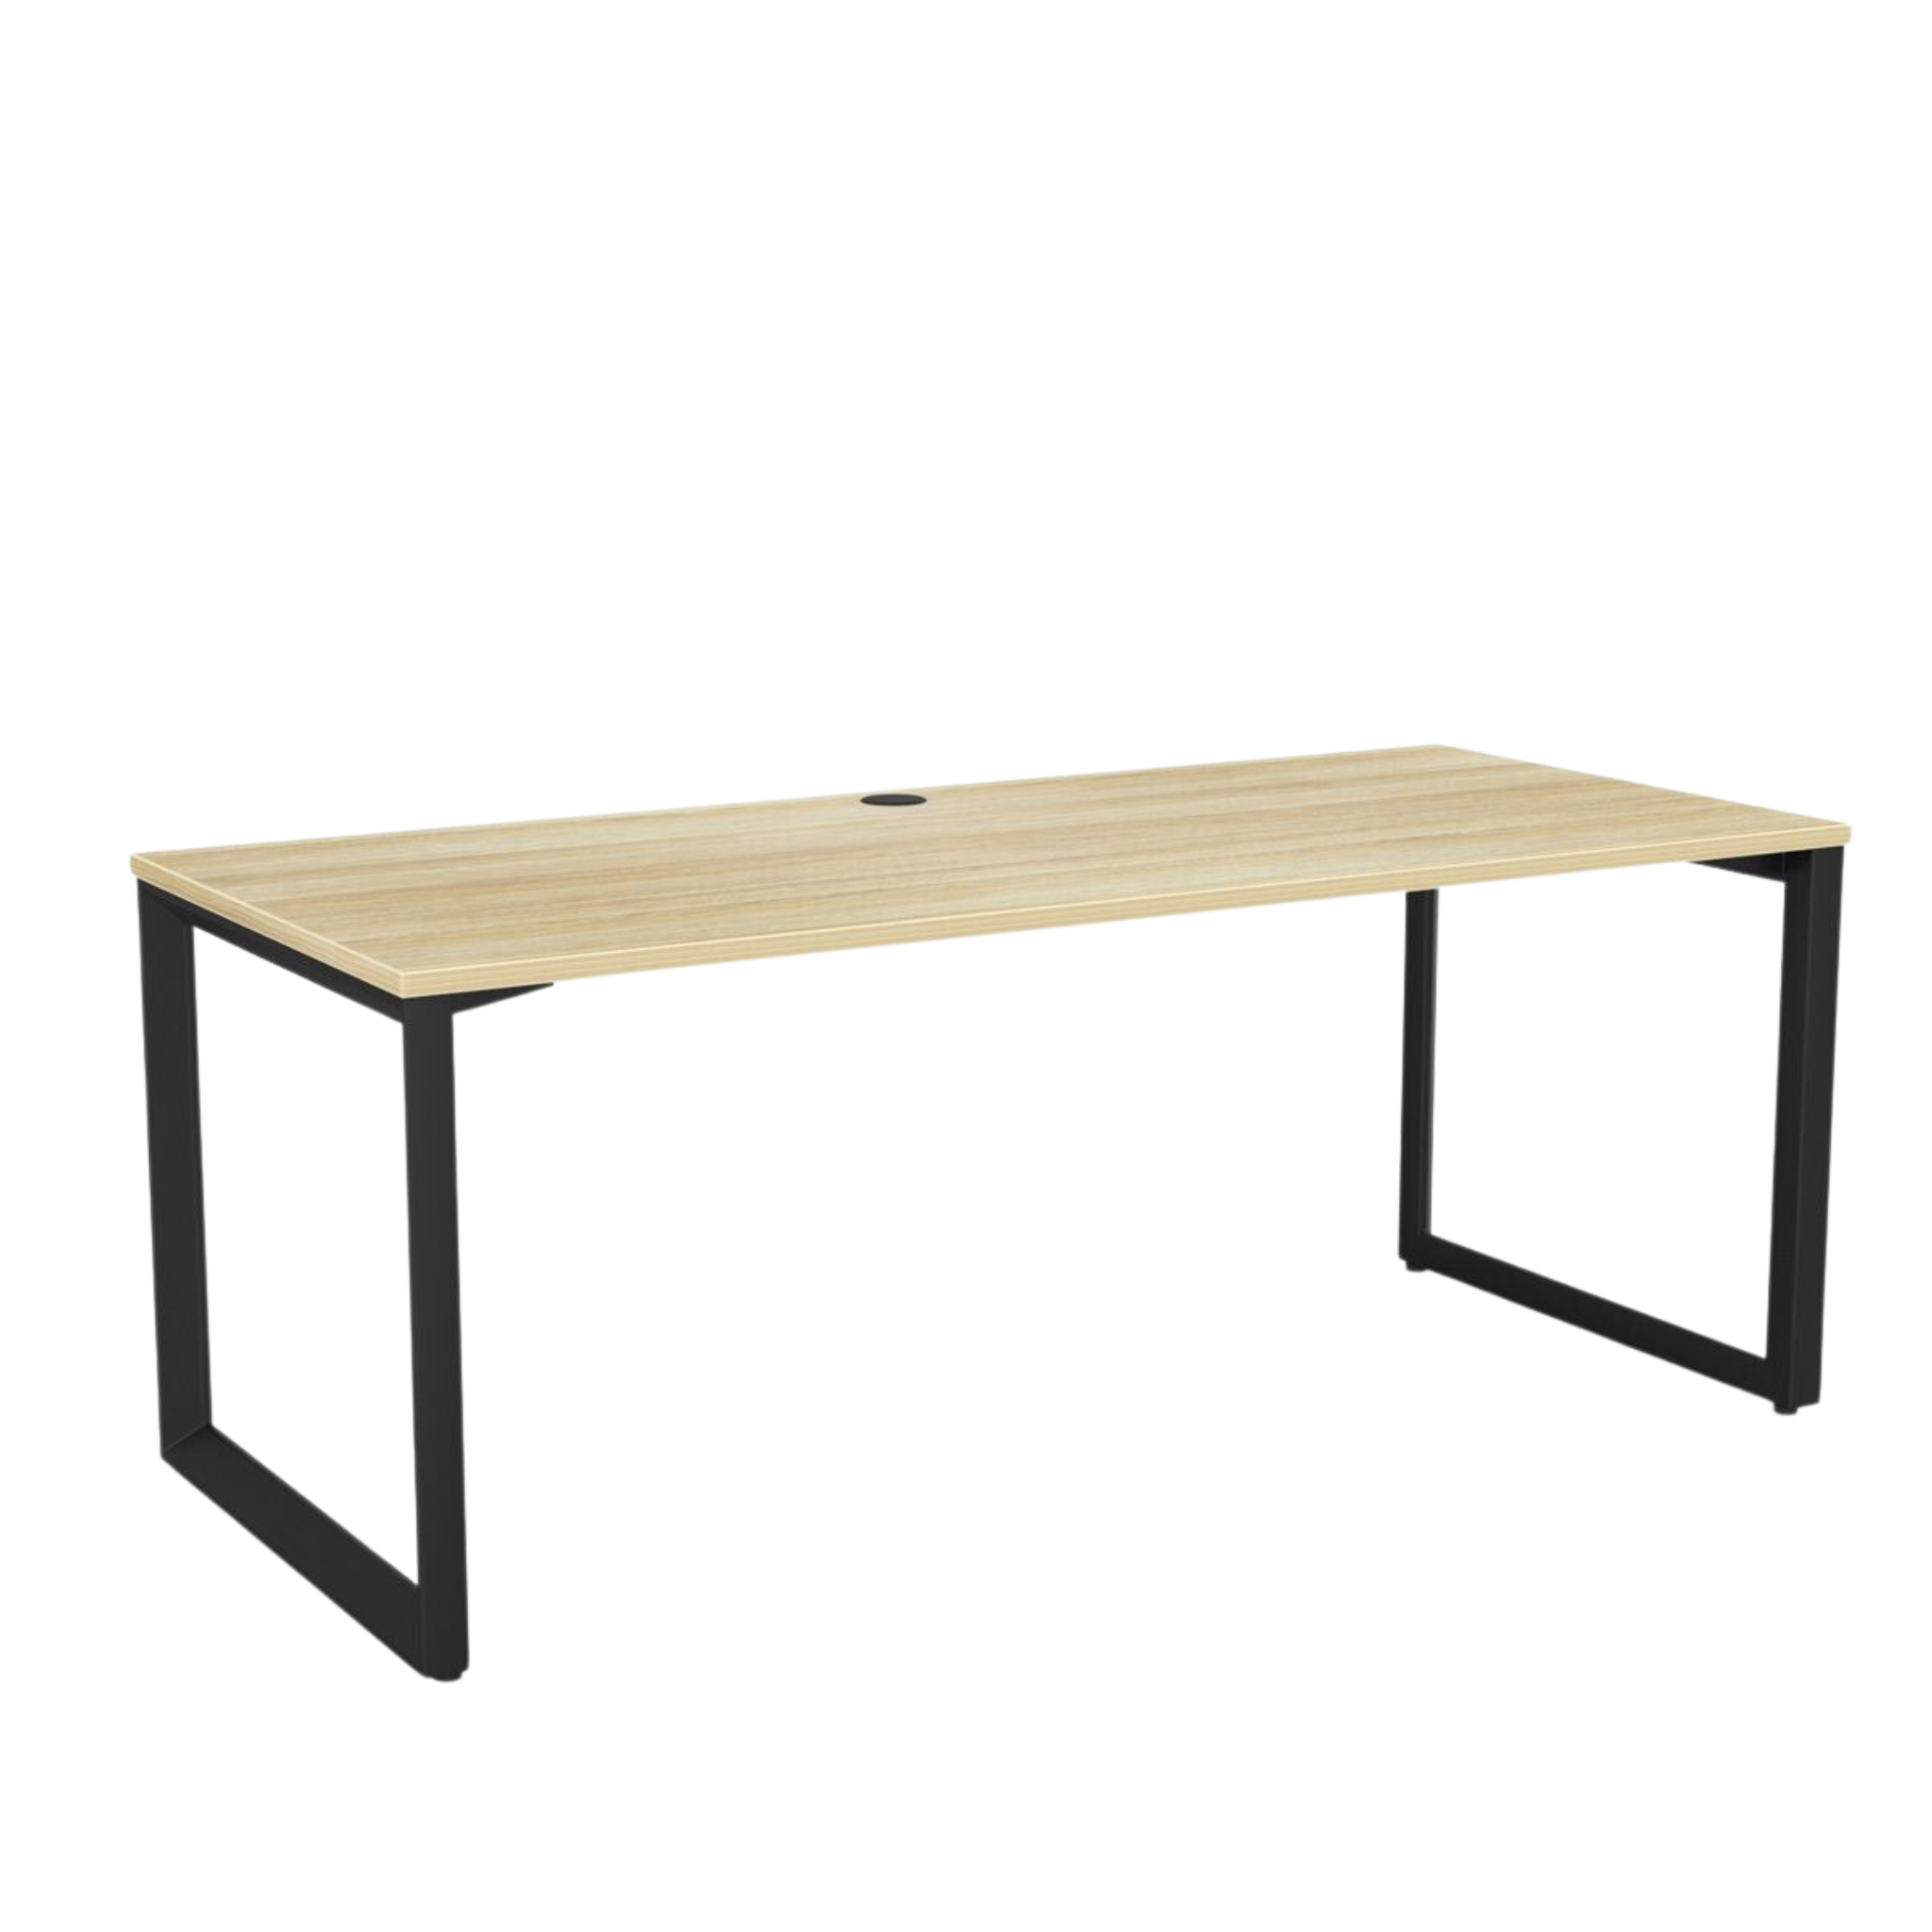 Anvil fixed height desk with black metal frame and atlantic oak melteca top